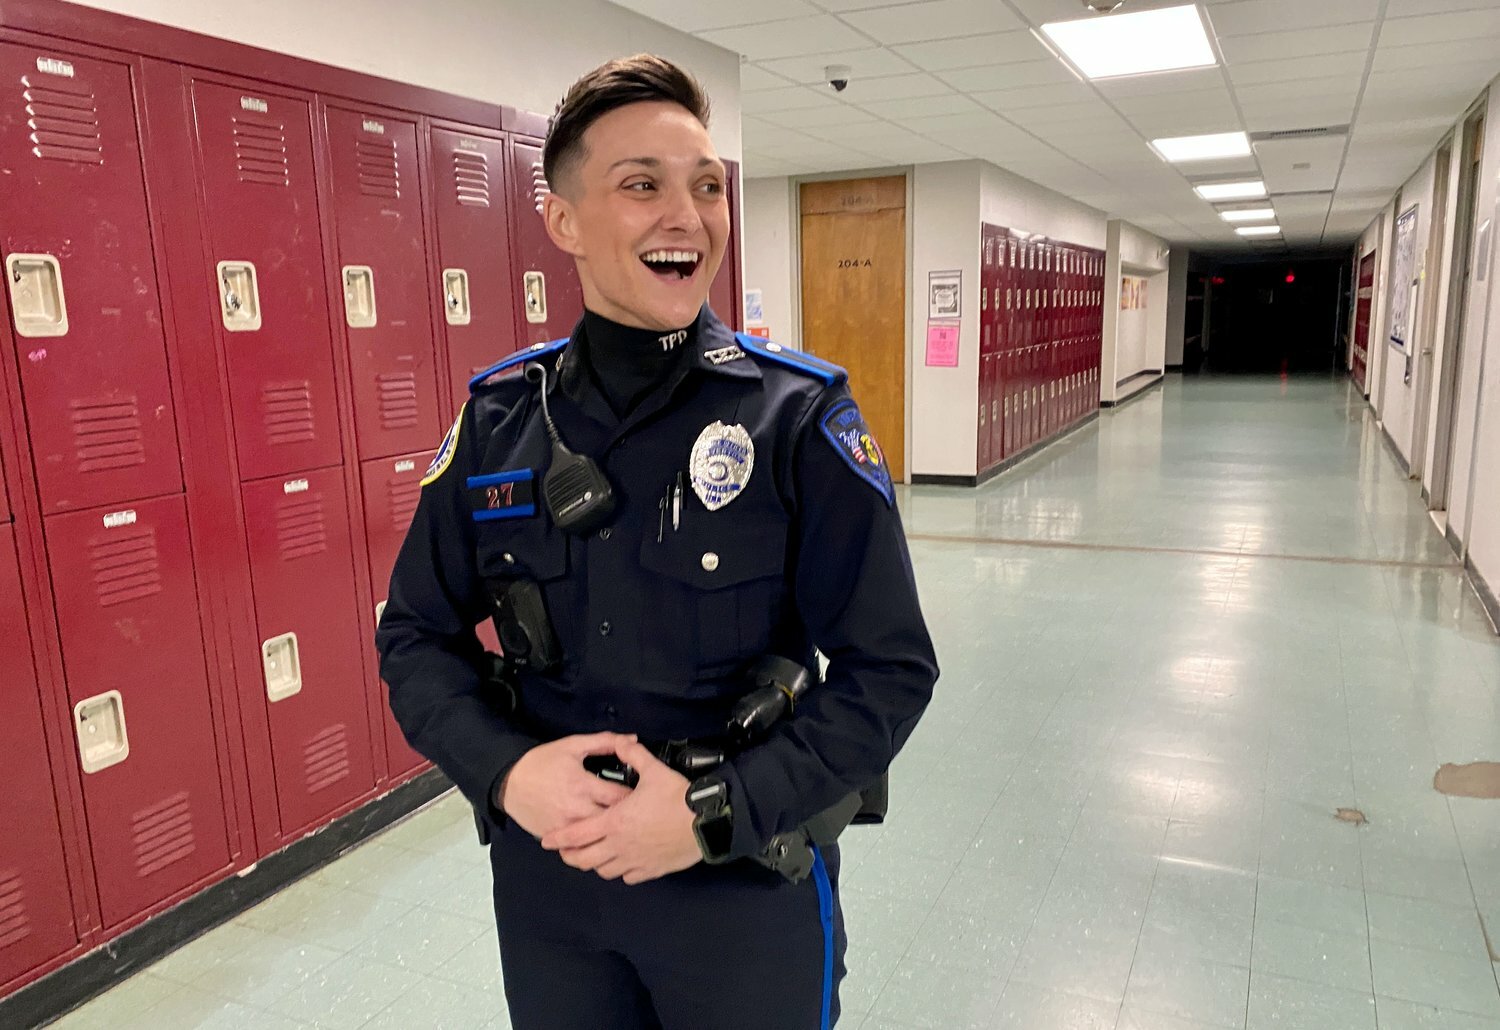 Tiverton SRO Jackie Smaldone is being praised for her work at Tiverton High School, though the town and school committee haven’t yet settled on an MOU.